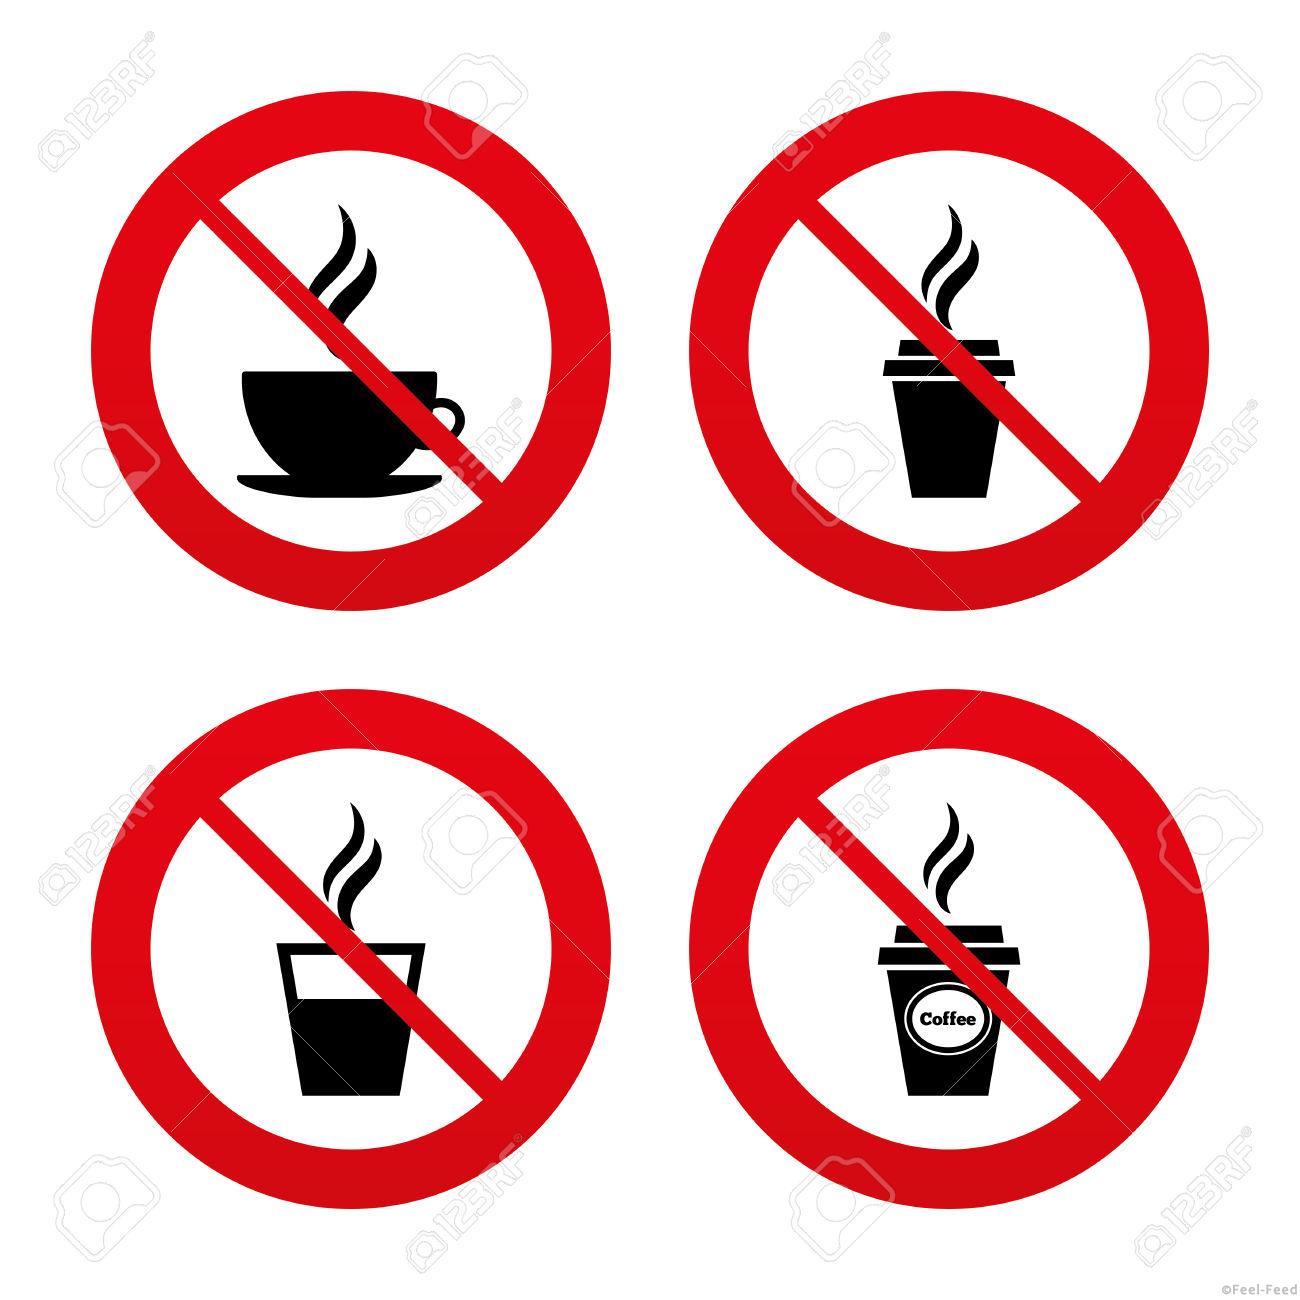 No, Ban or Stop signs. Coffee cup icon. Hot drinks glasses symbols. Take away or take-out tea beverage signs. Prohibition forbidden red symbols. Vector